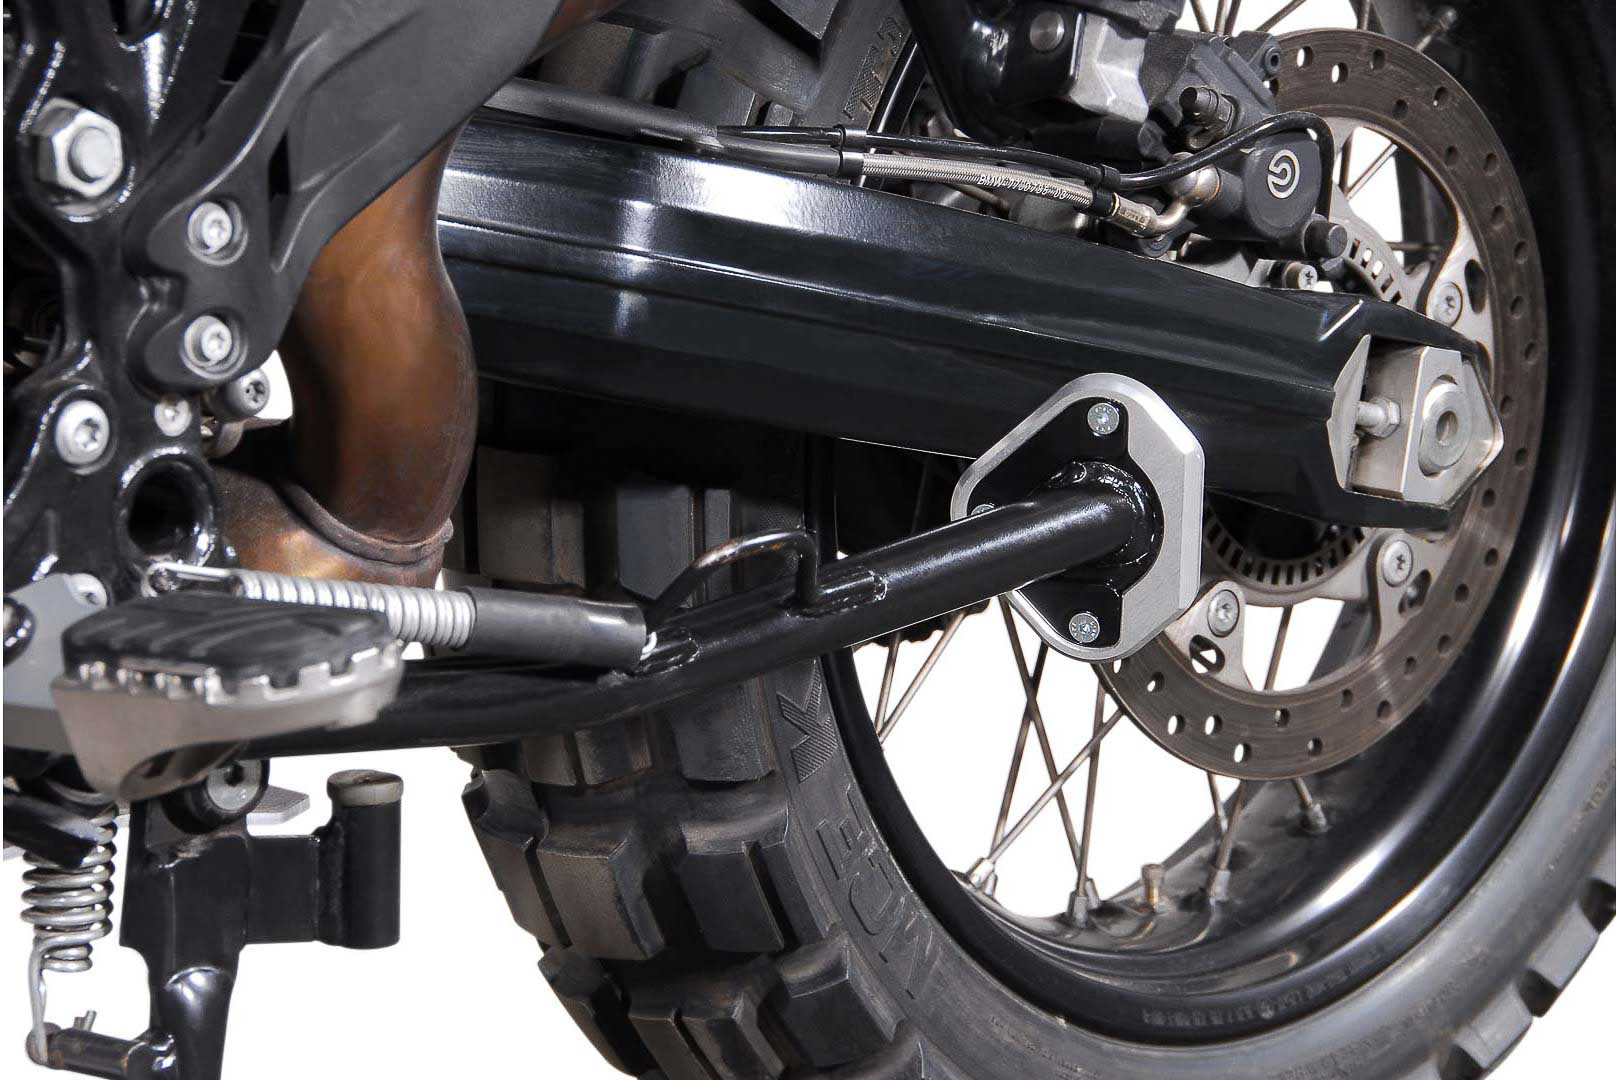 Extension for Side Stand Foot BMW F650GS/F800GS, Husqvarna TR650 Black/Silver